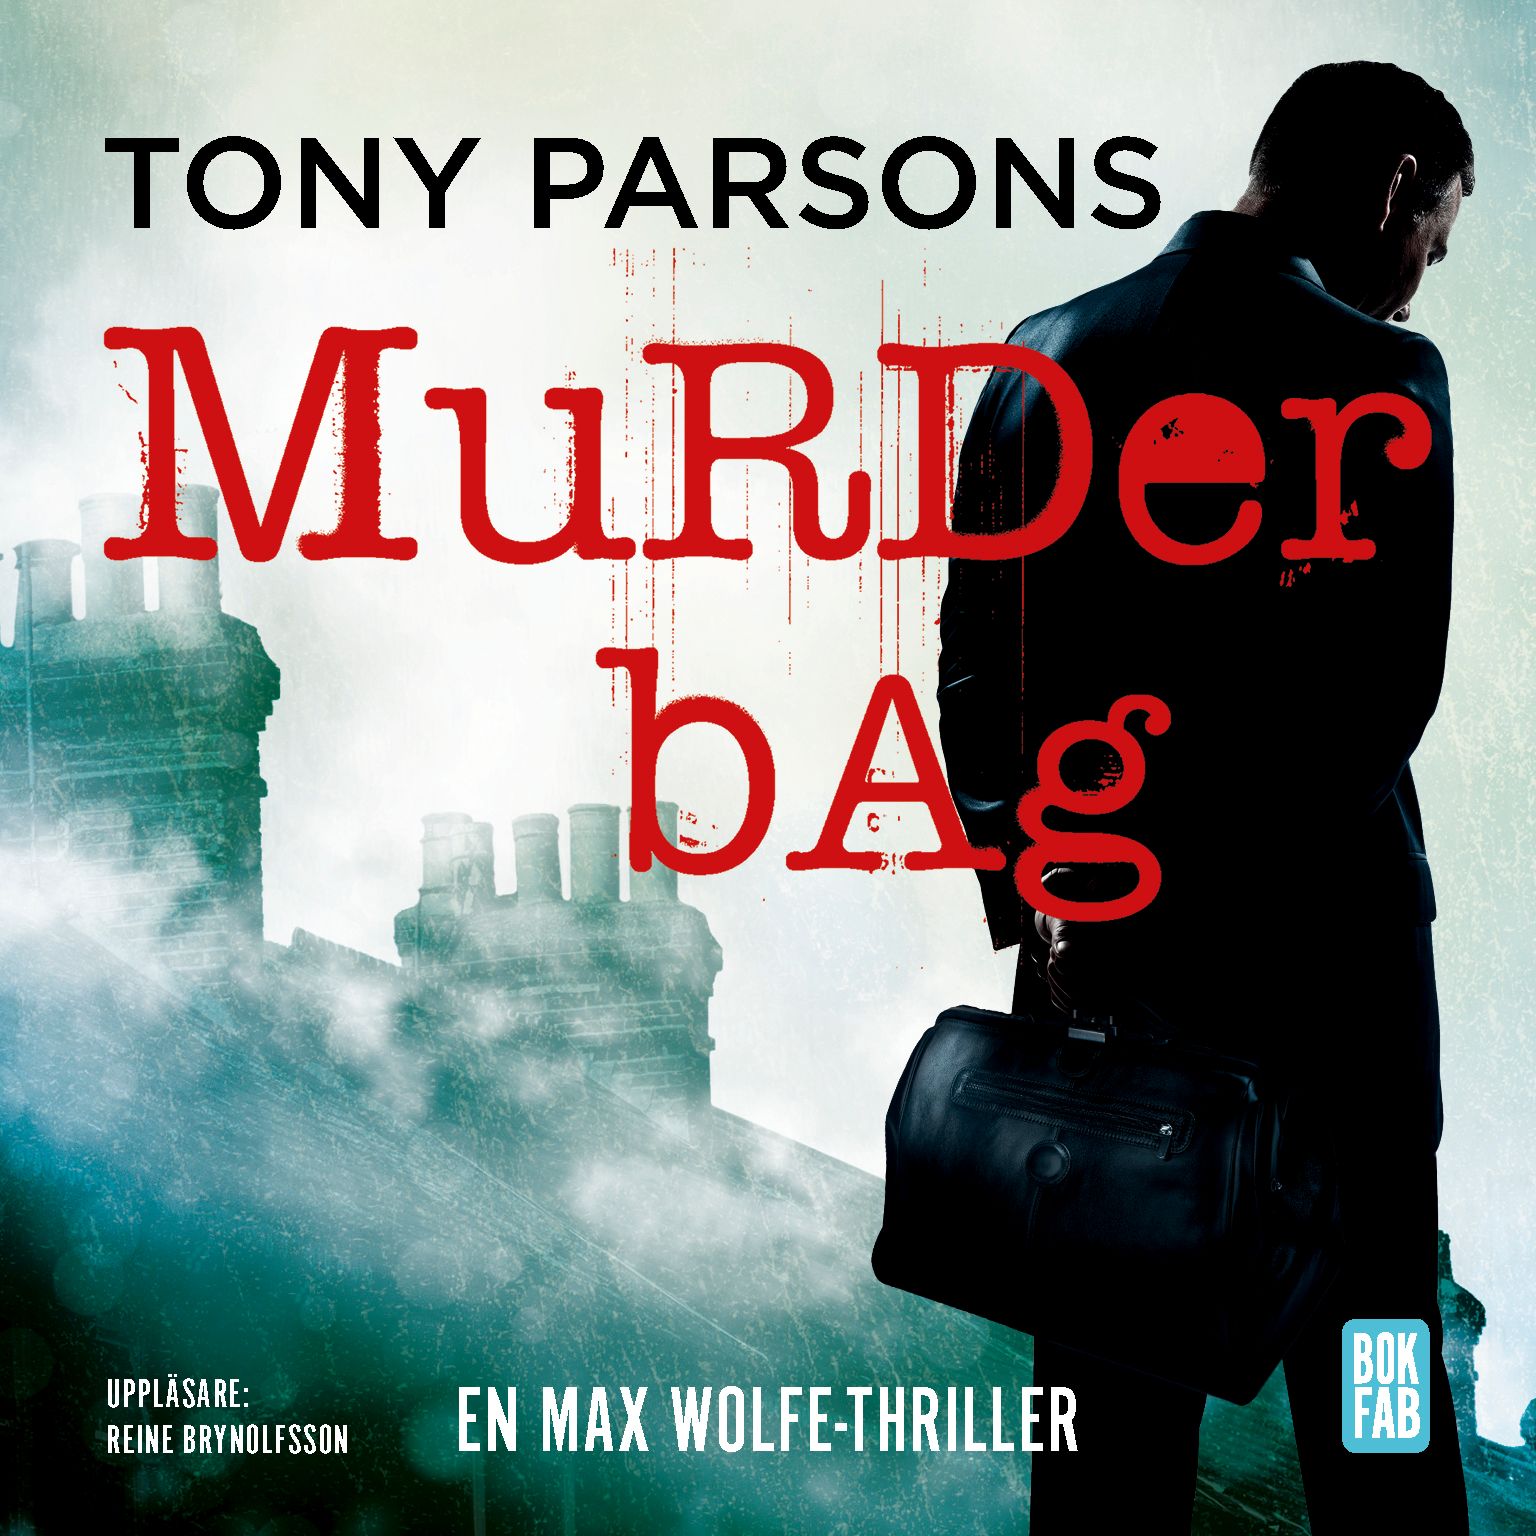 Murder bag, audiobook by Tony Parsons